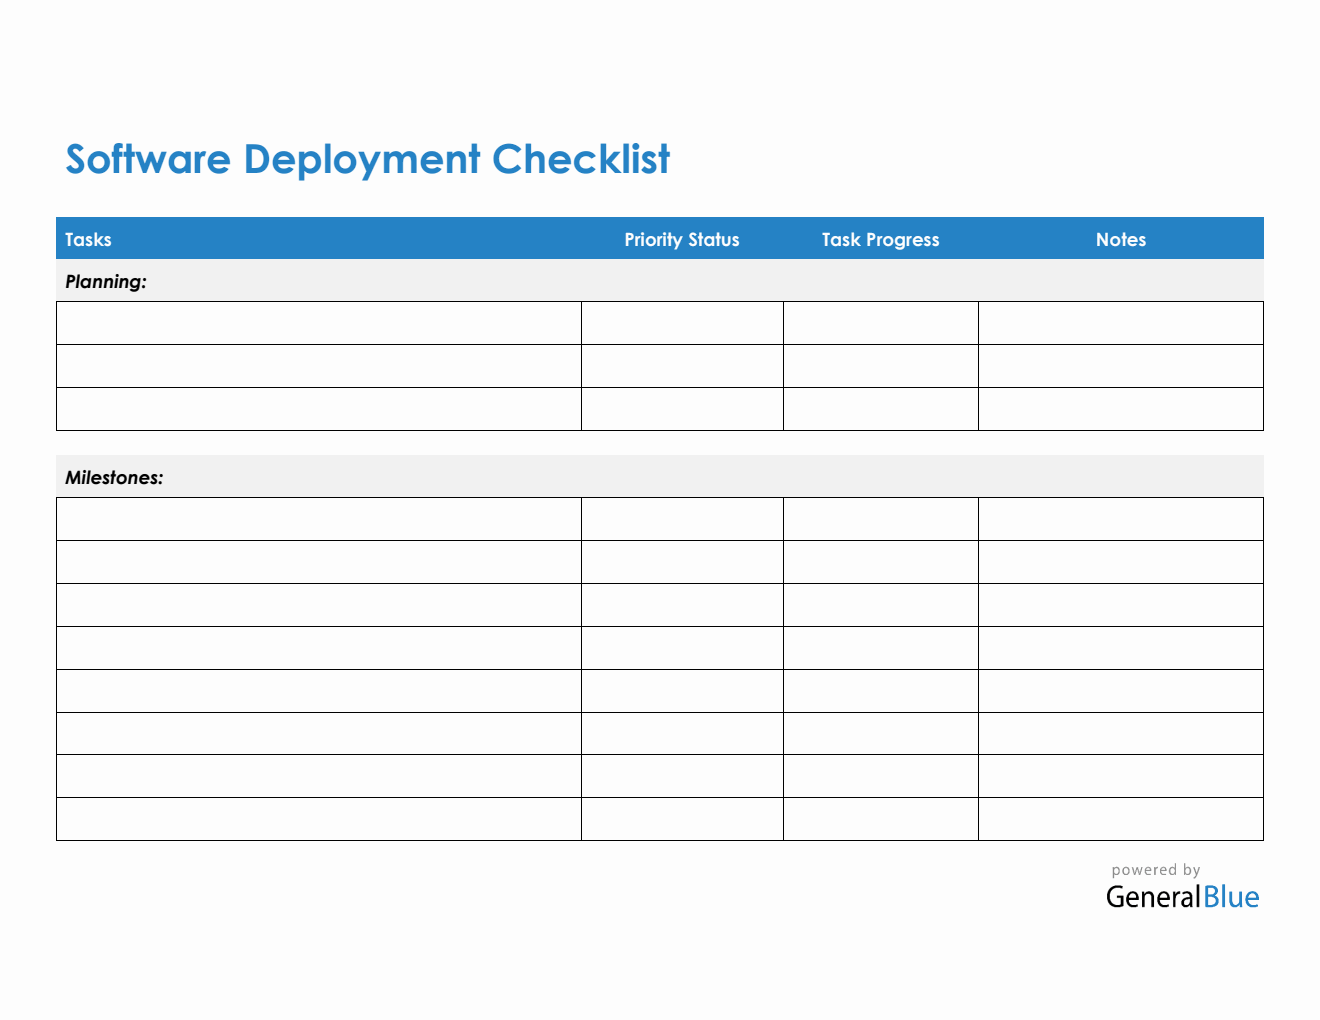 Software and System Deployment Checklist in PDF